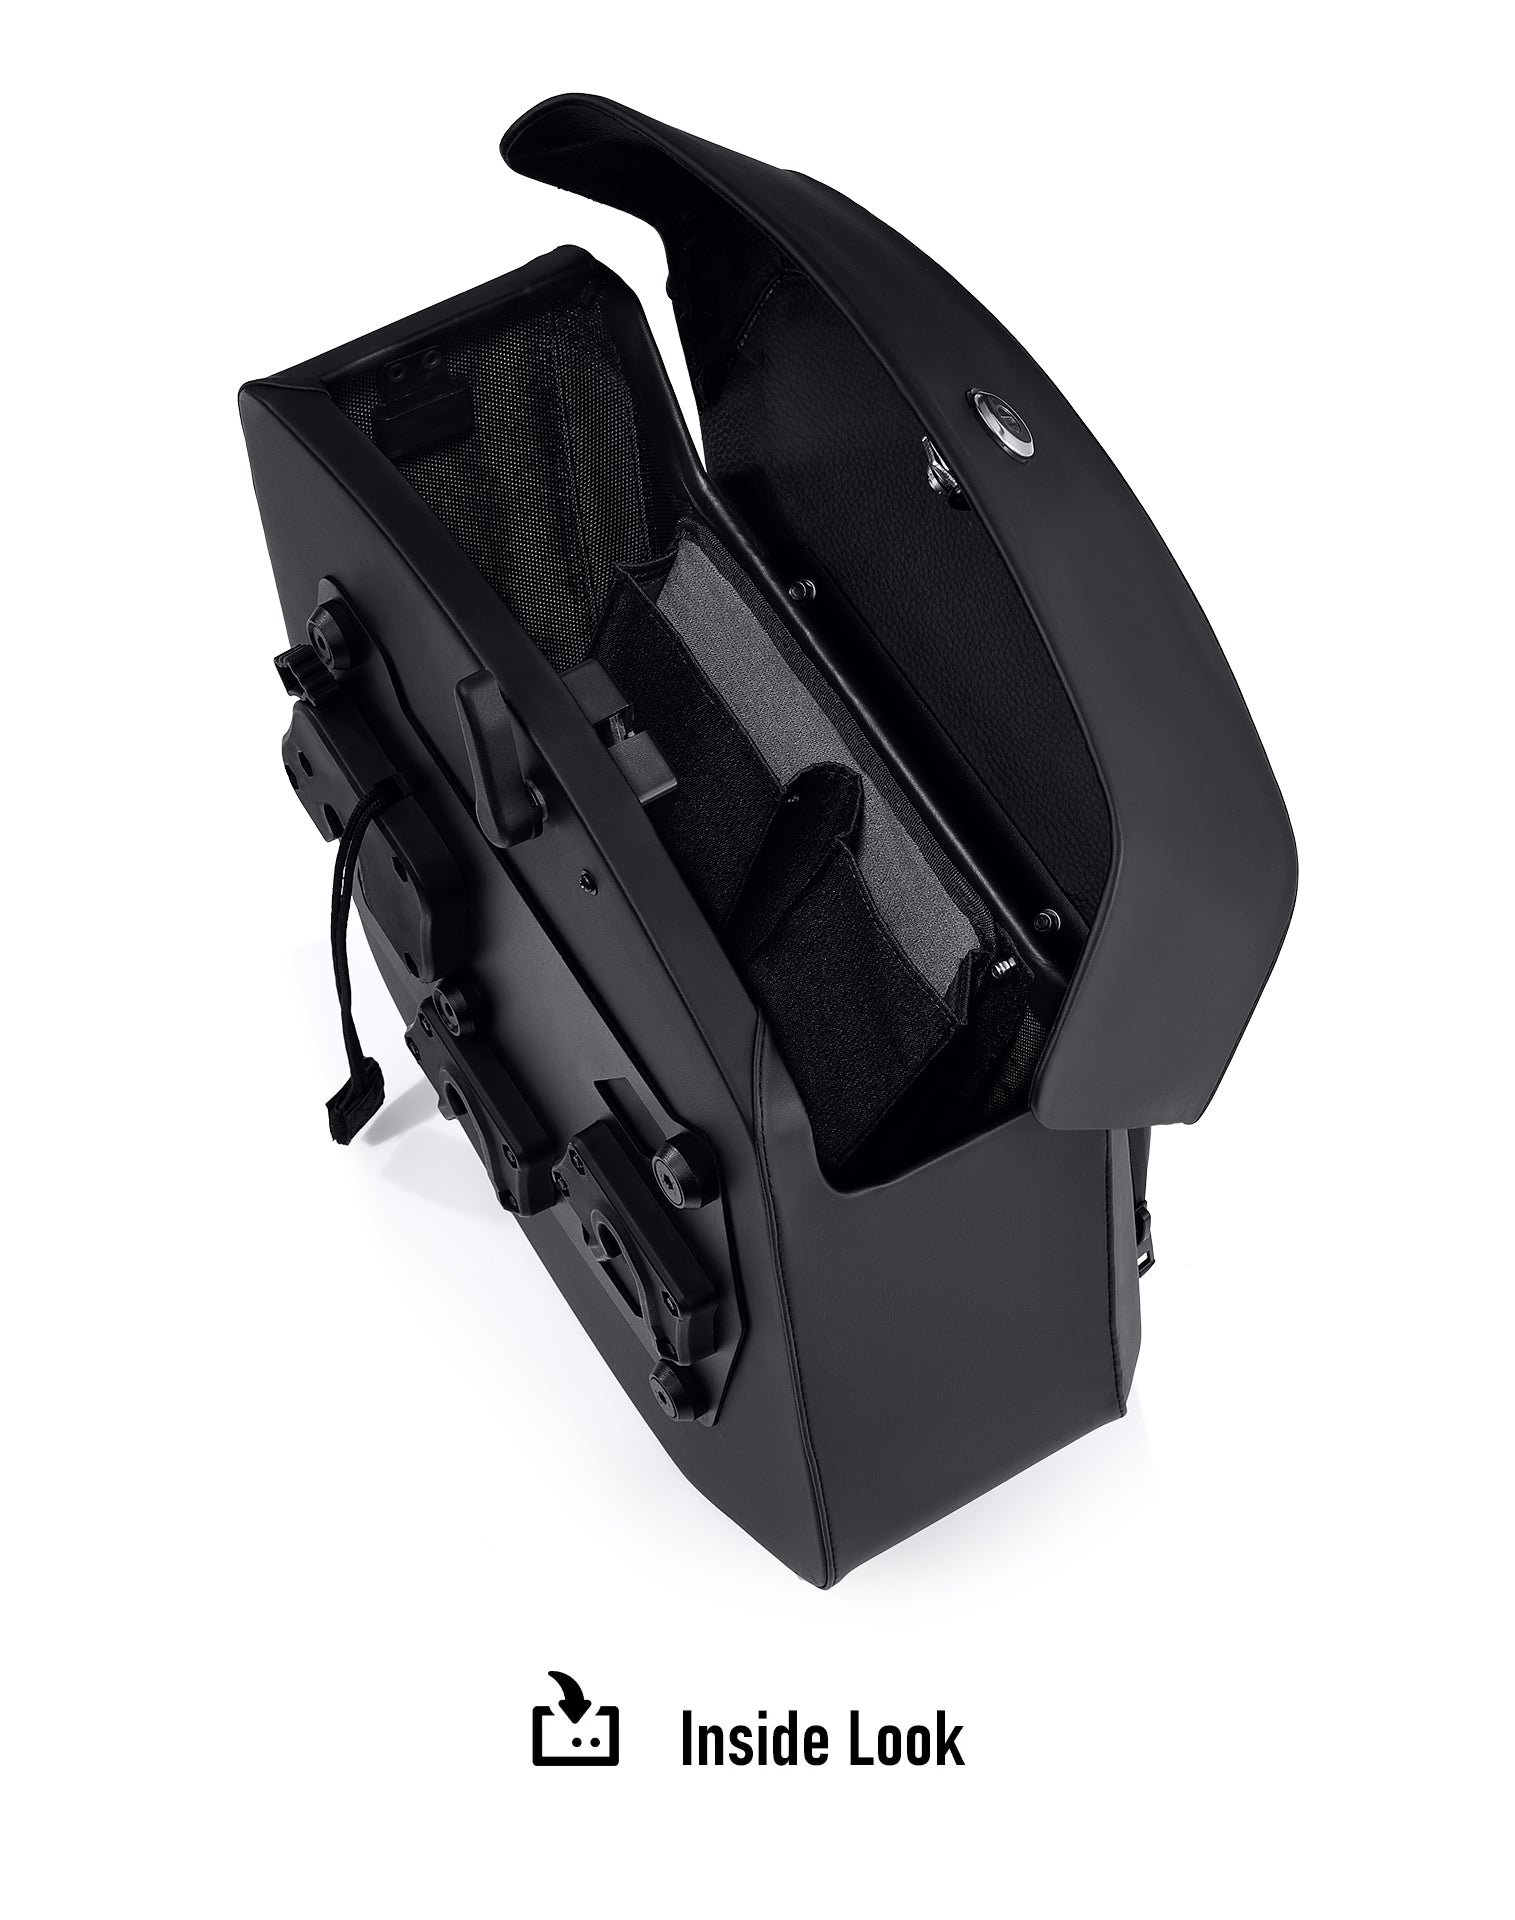 28L - Pantheon Medium Quick-Mount Motorcycle Saddlebags For Harley Sportster Super Low XL883L Inside Look